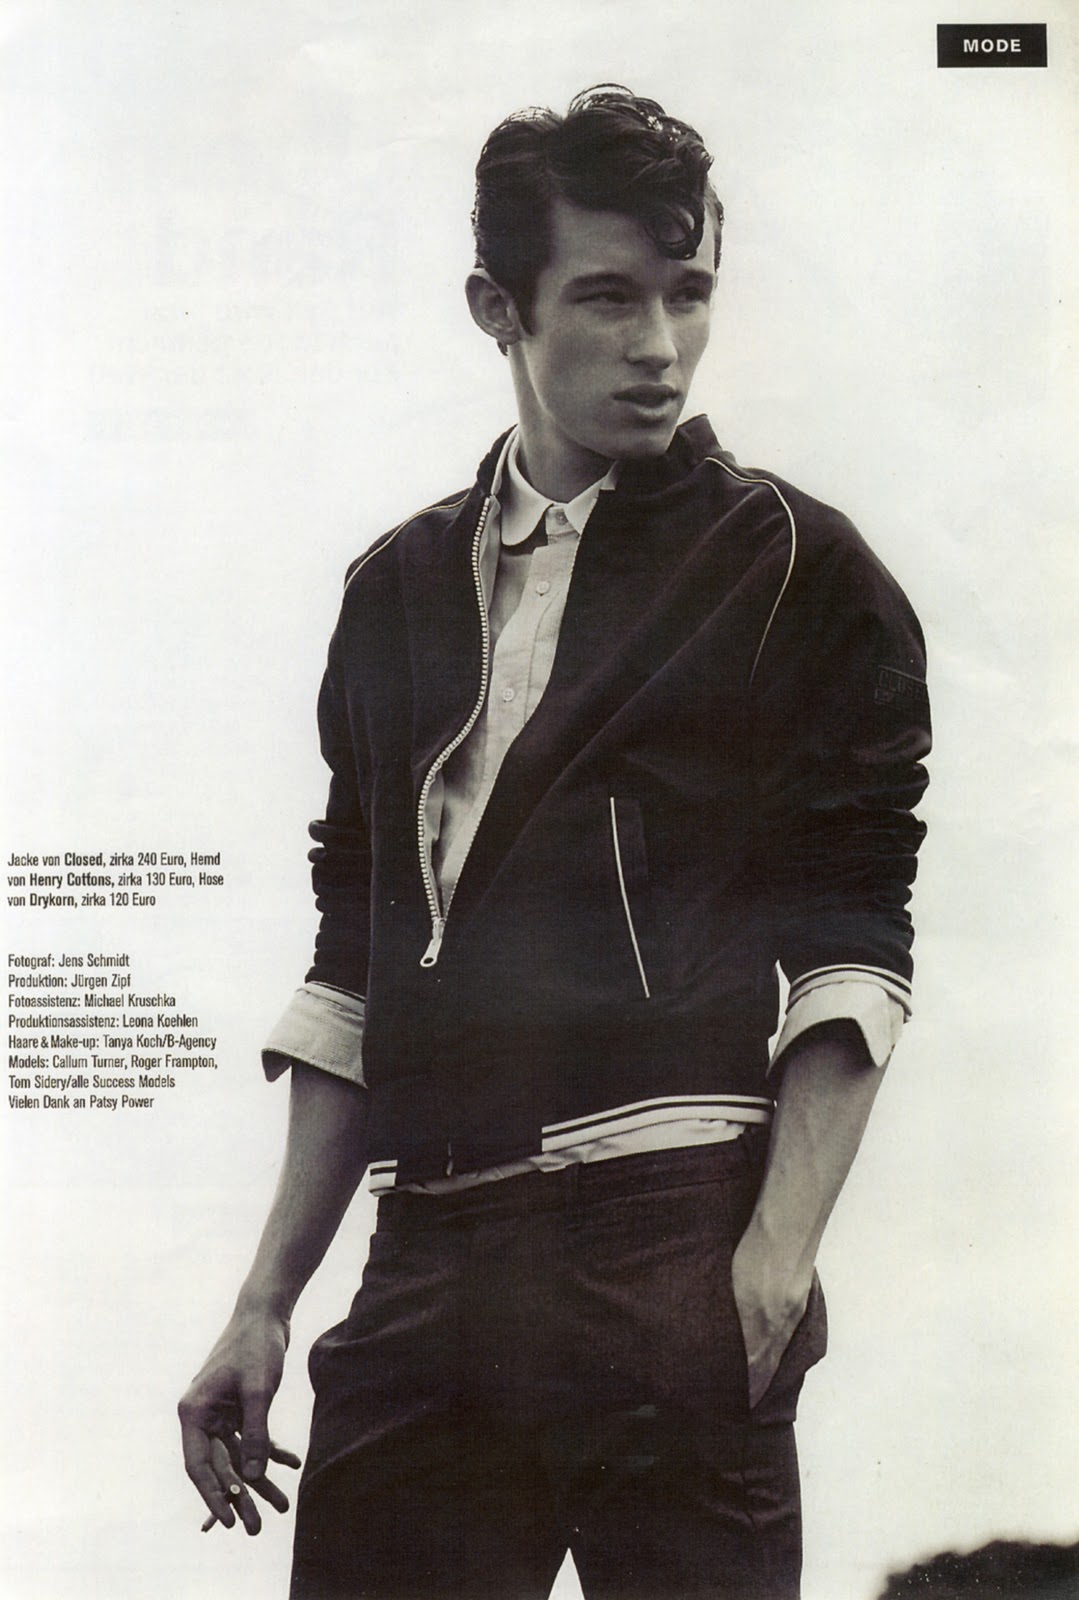 Next Models LA: CALLUM TURNER in town from London!!